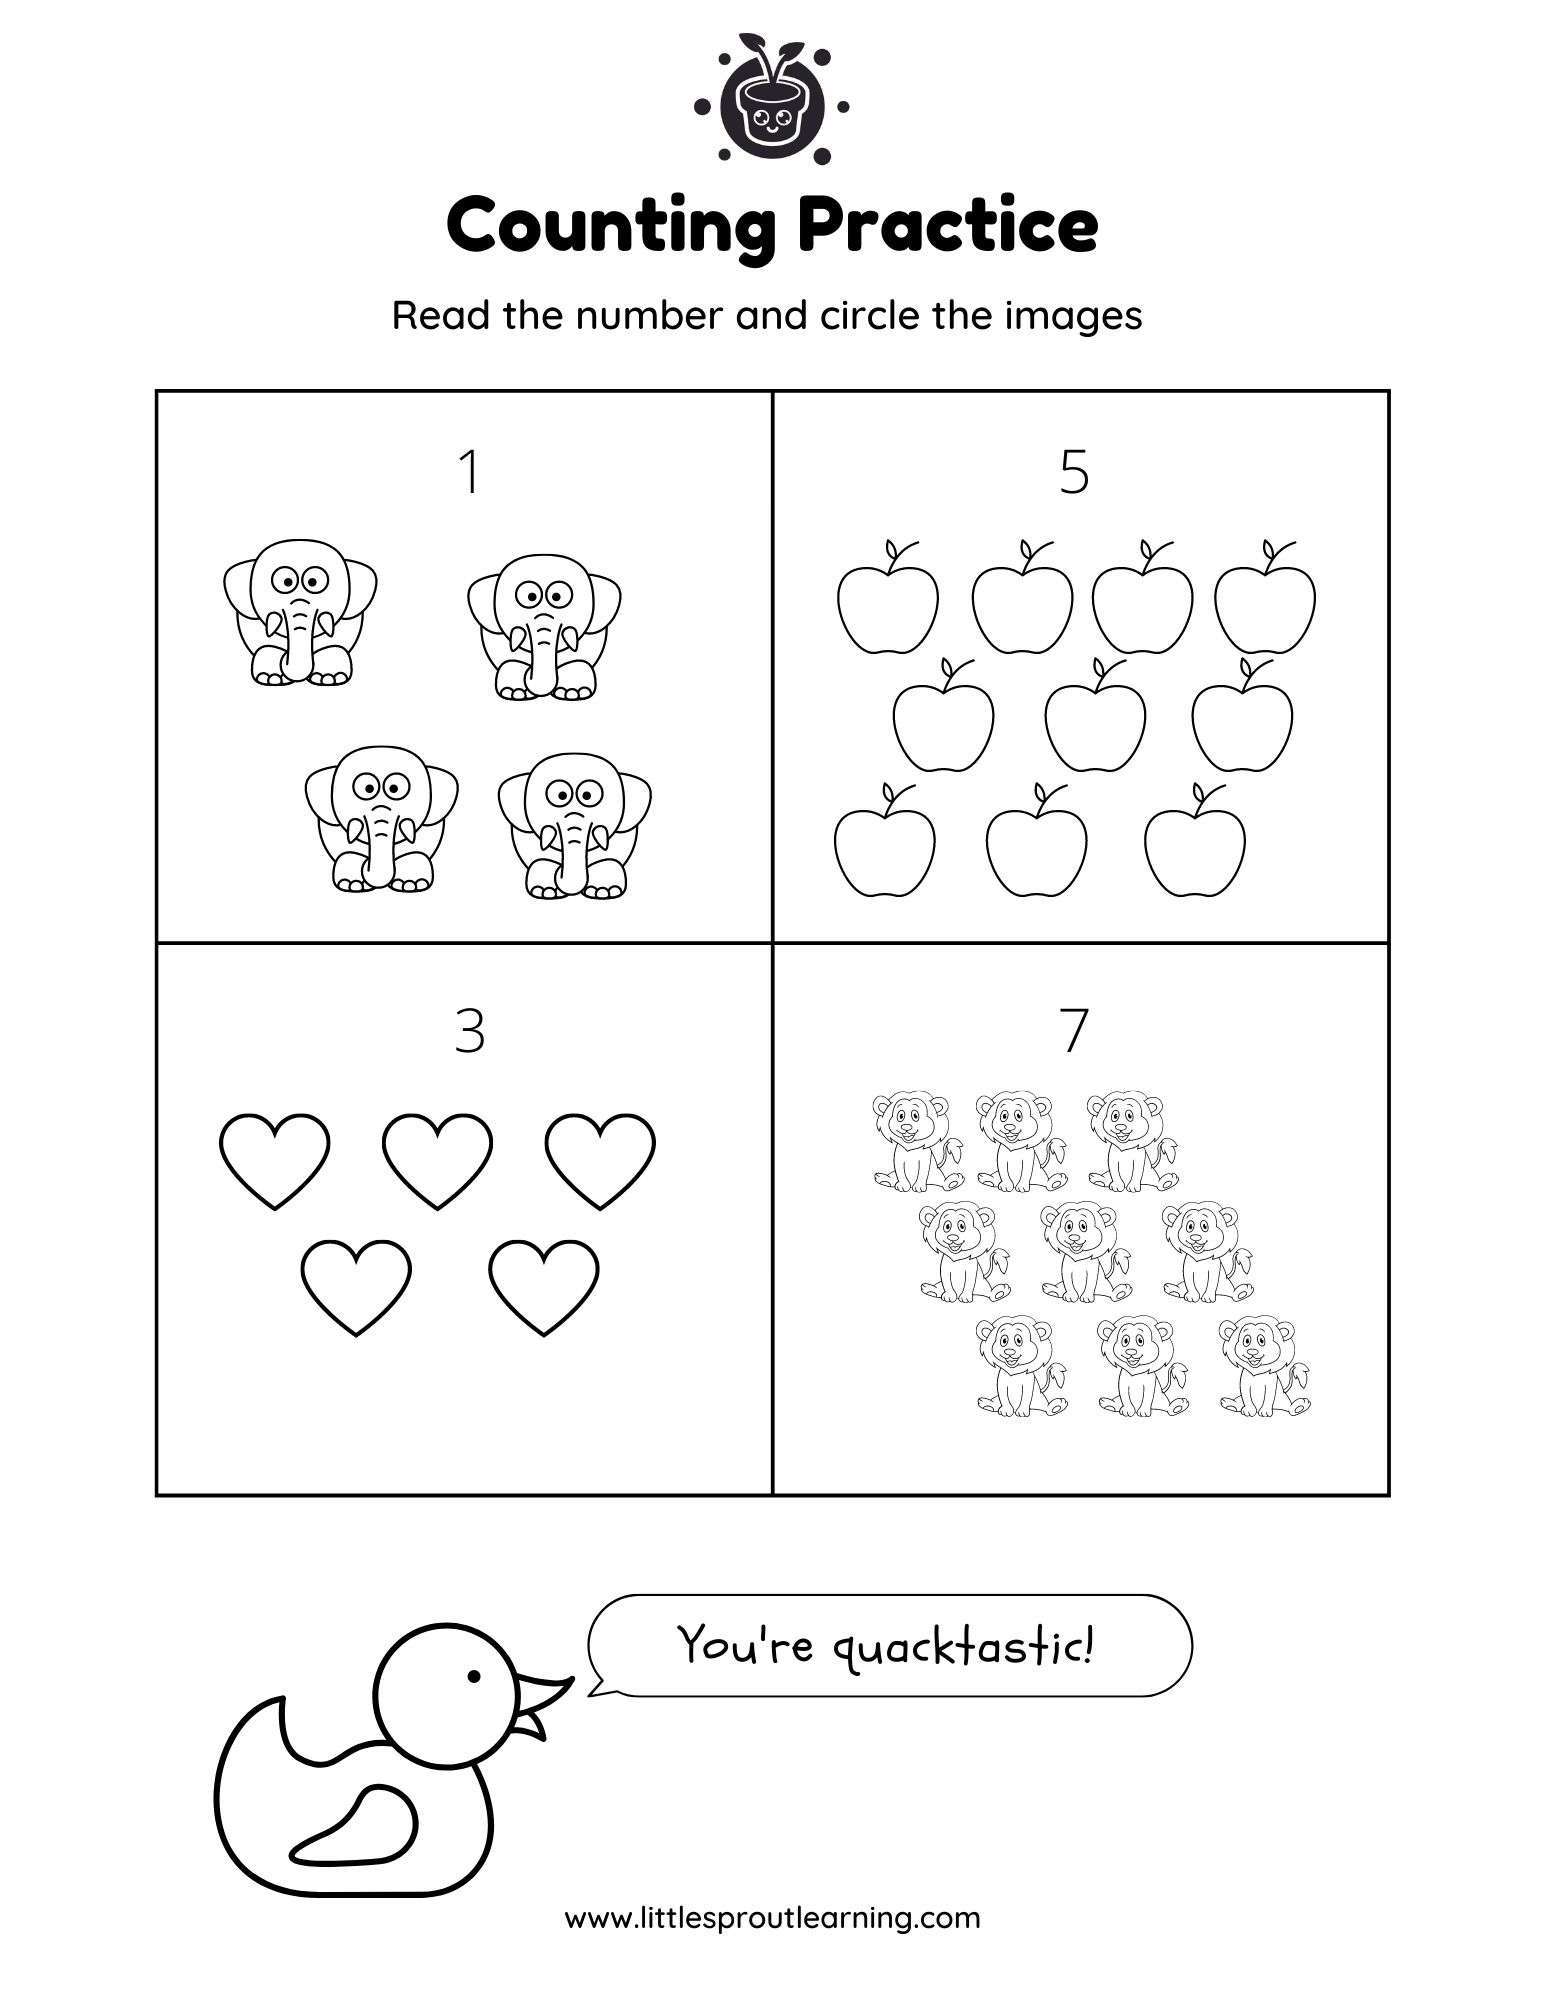 Counting Practice Read the Number Circle the Correct Number of Objects